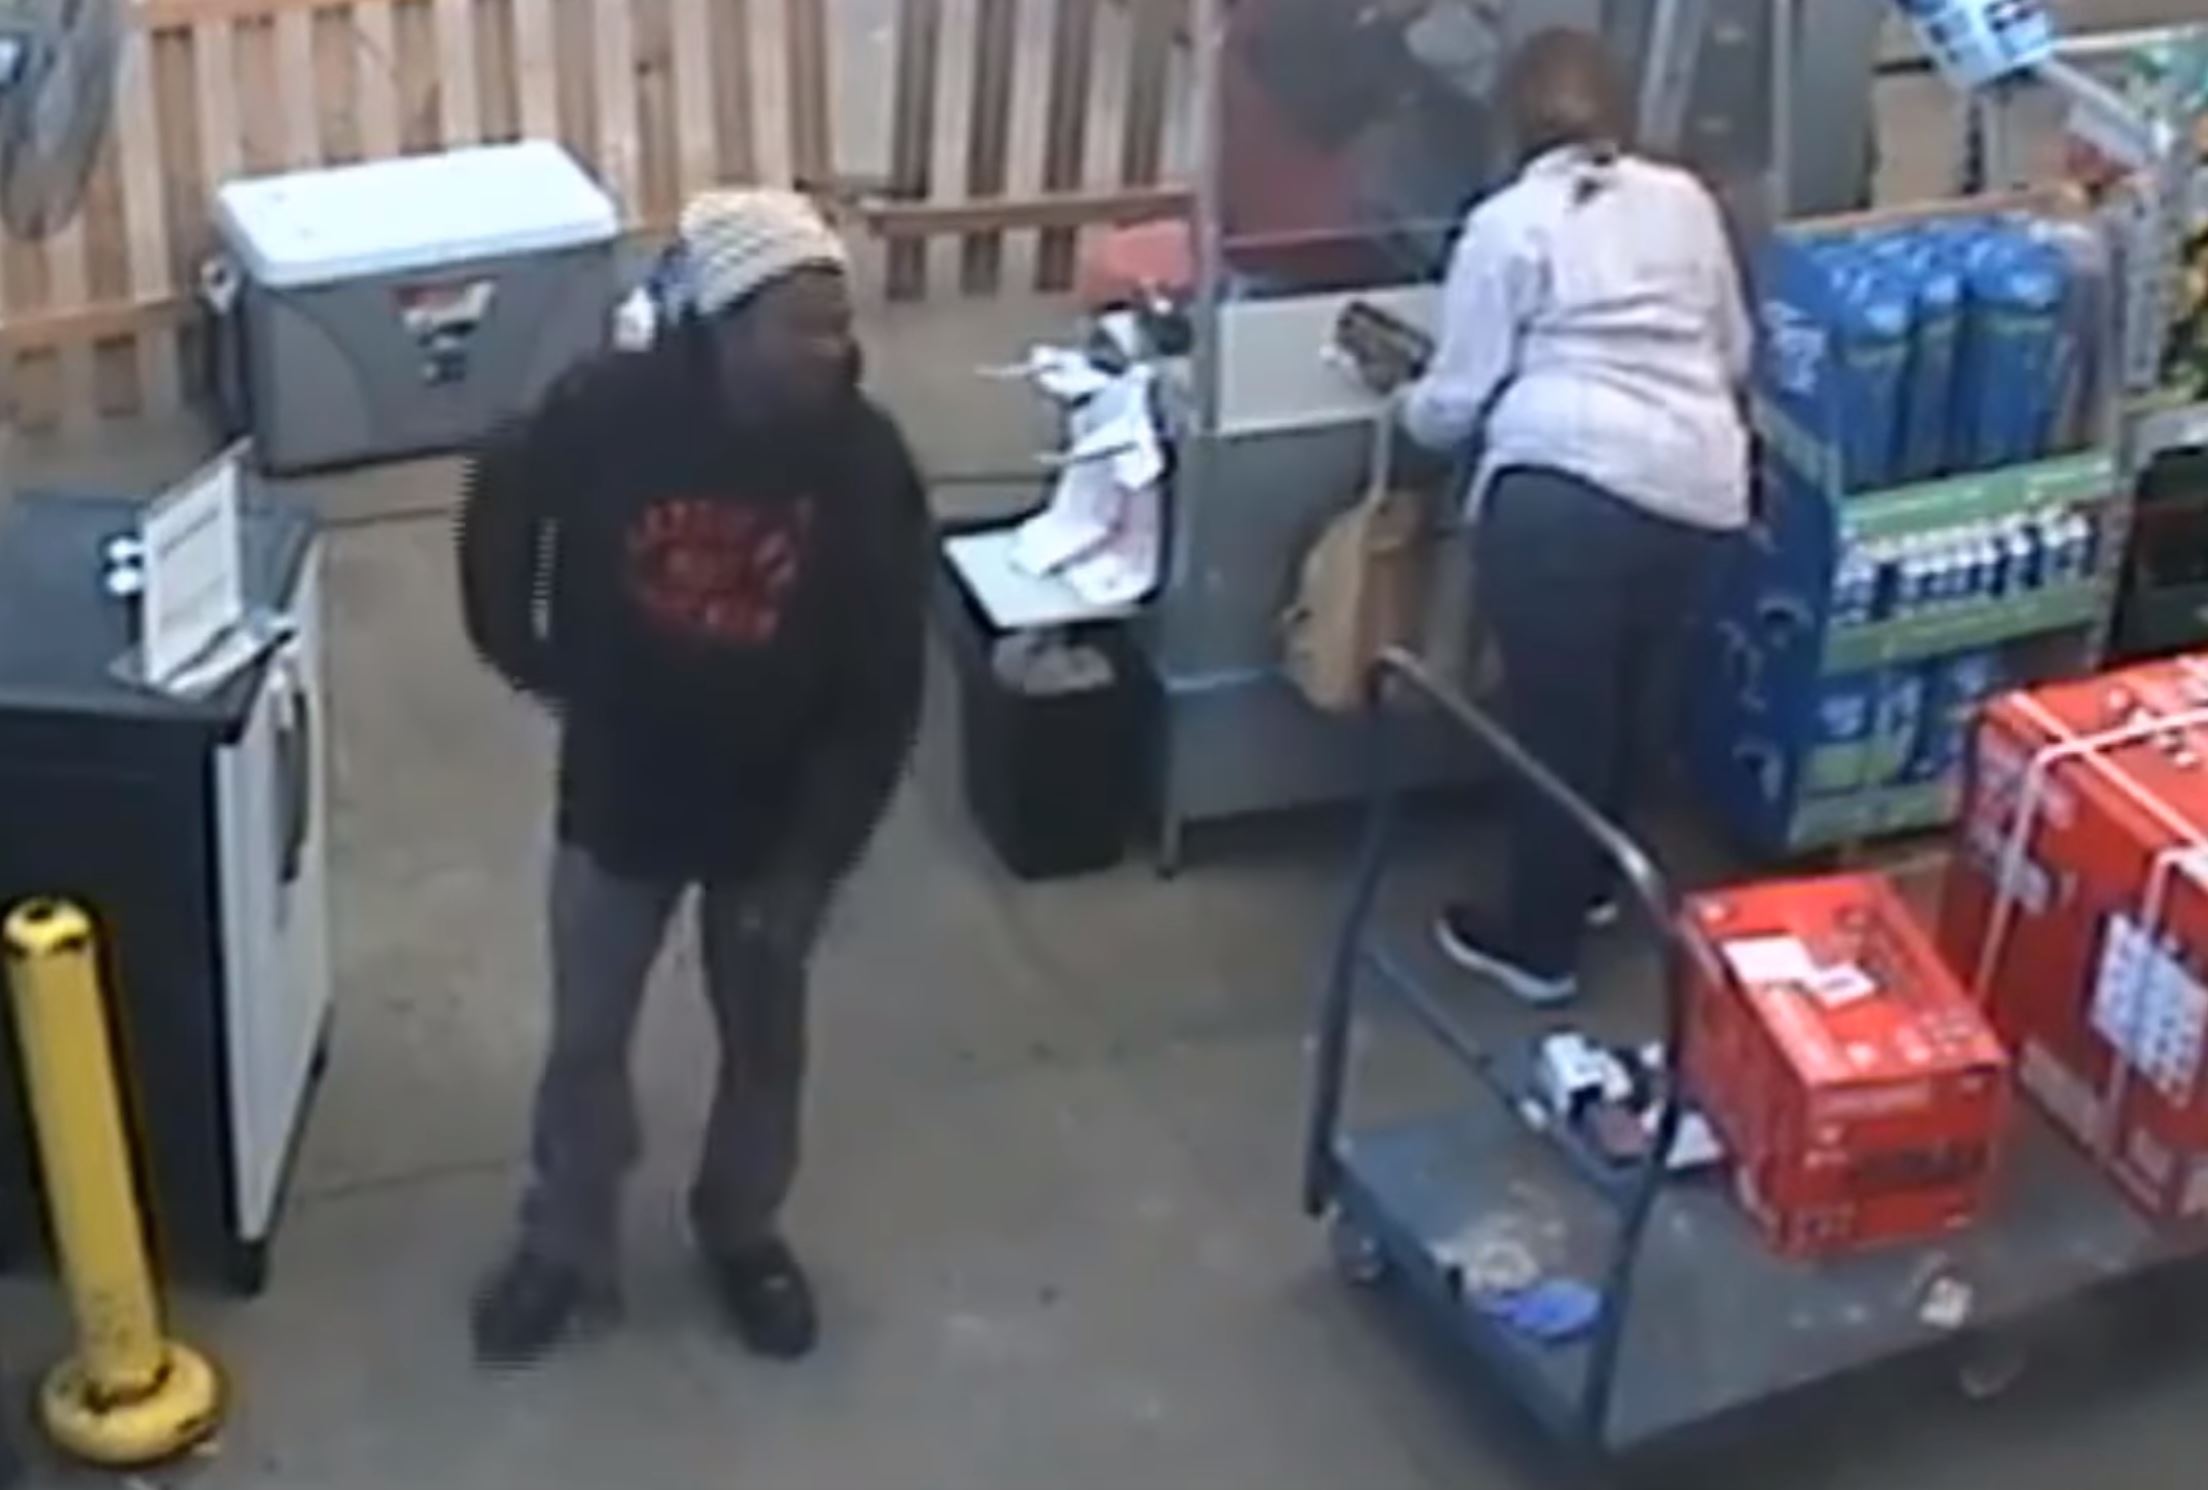 VIDEO: 2 wanted for questioning in Hoover wallet theft